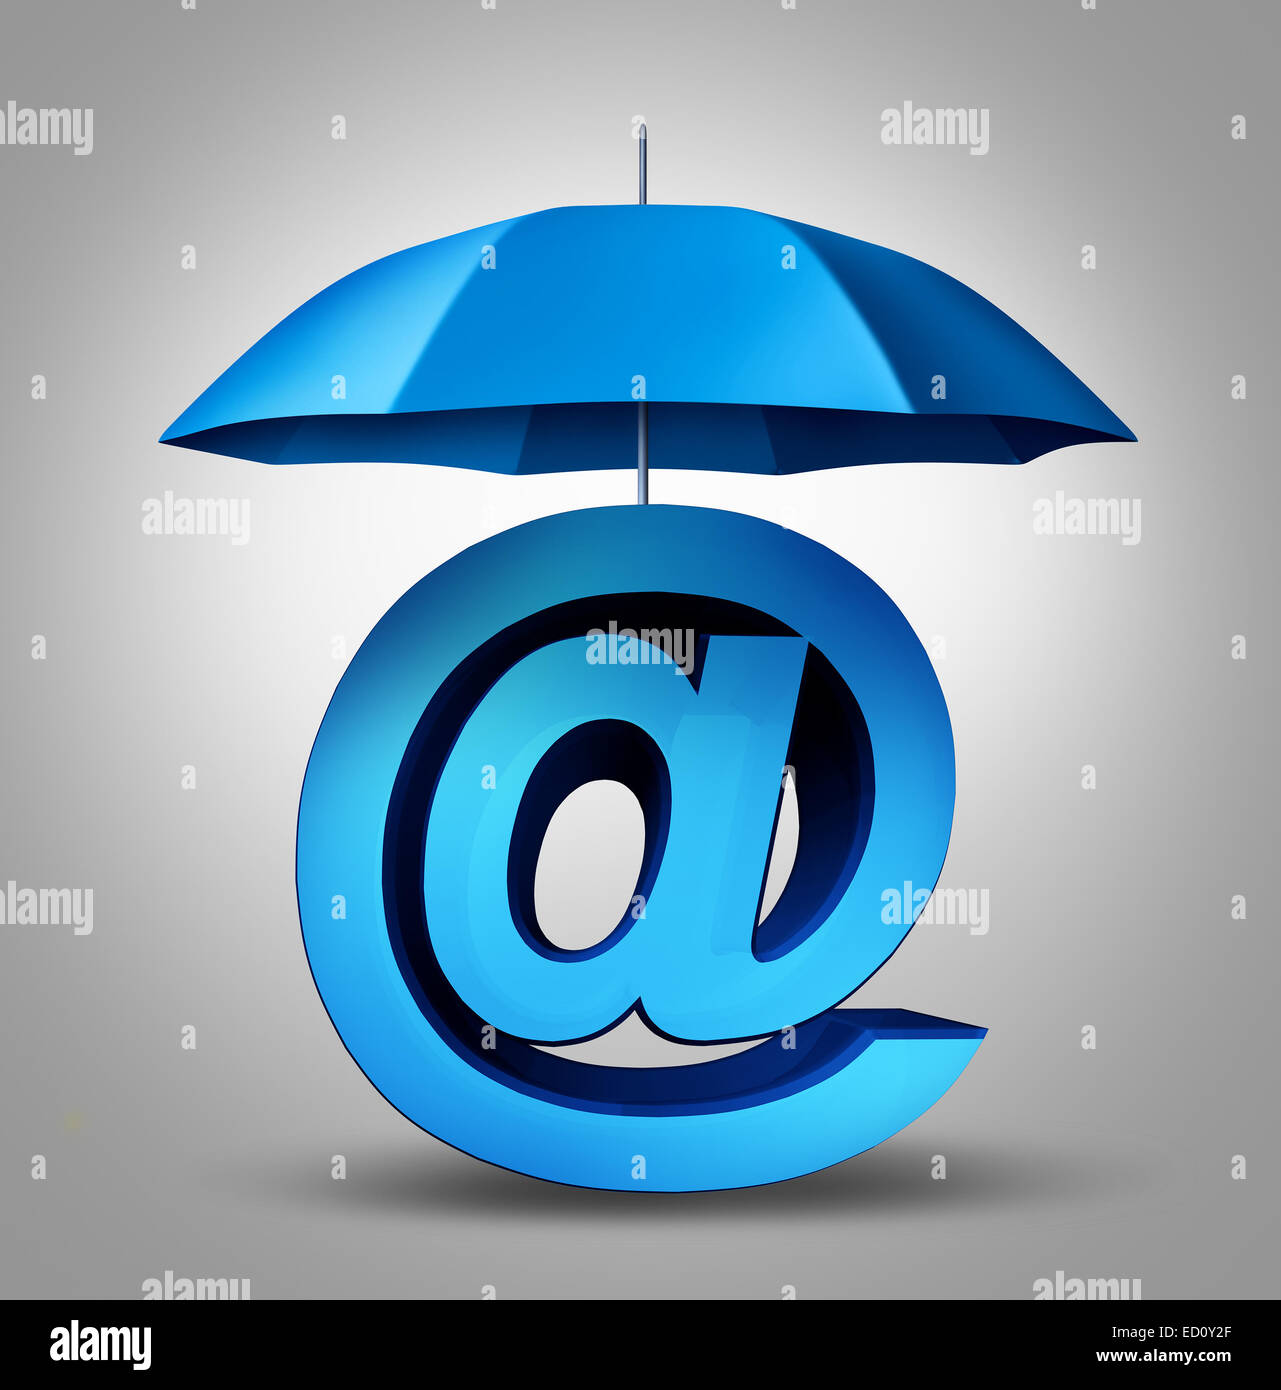 Internet security and email protection technology concept as a blue umbrella providing safety to a three dimensional ampersand web symbol and website icon. Stock Photo